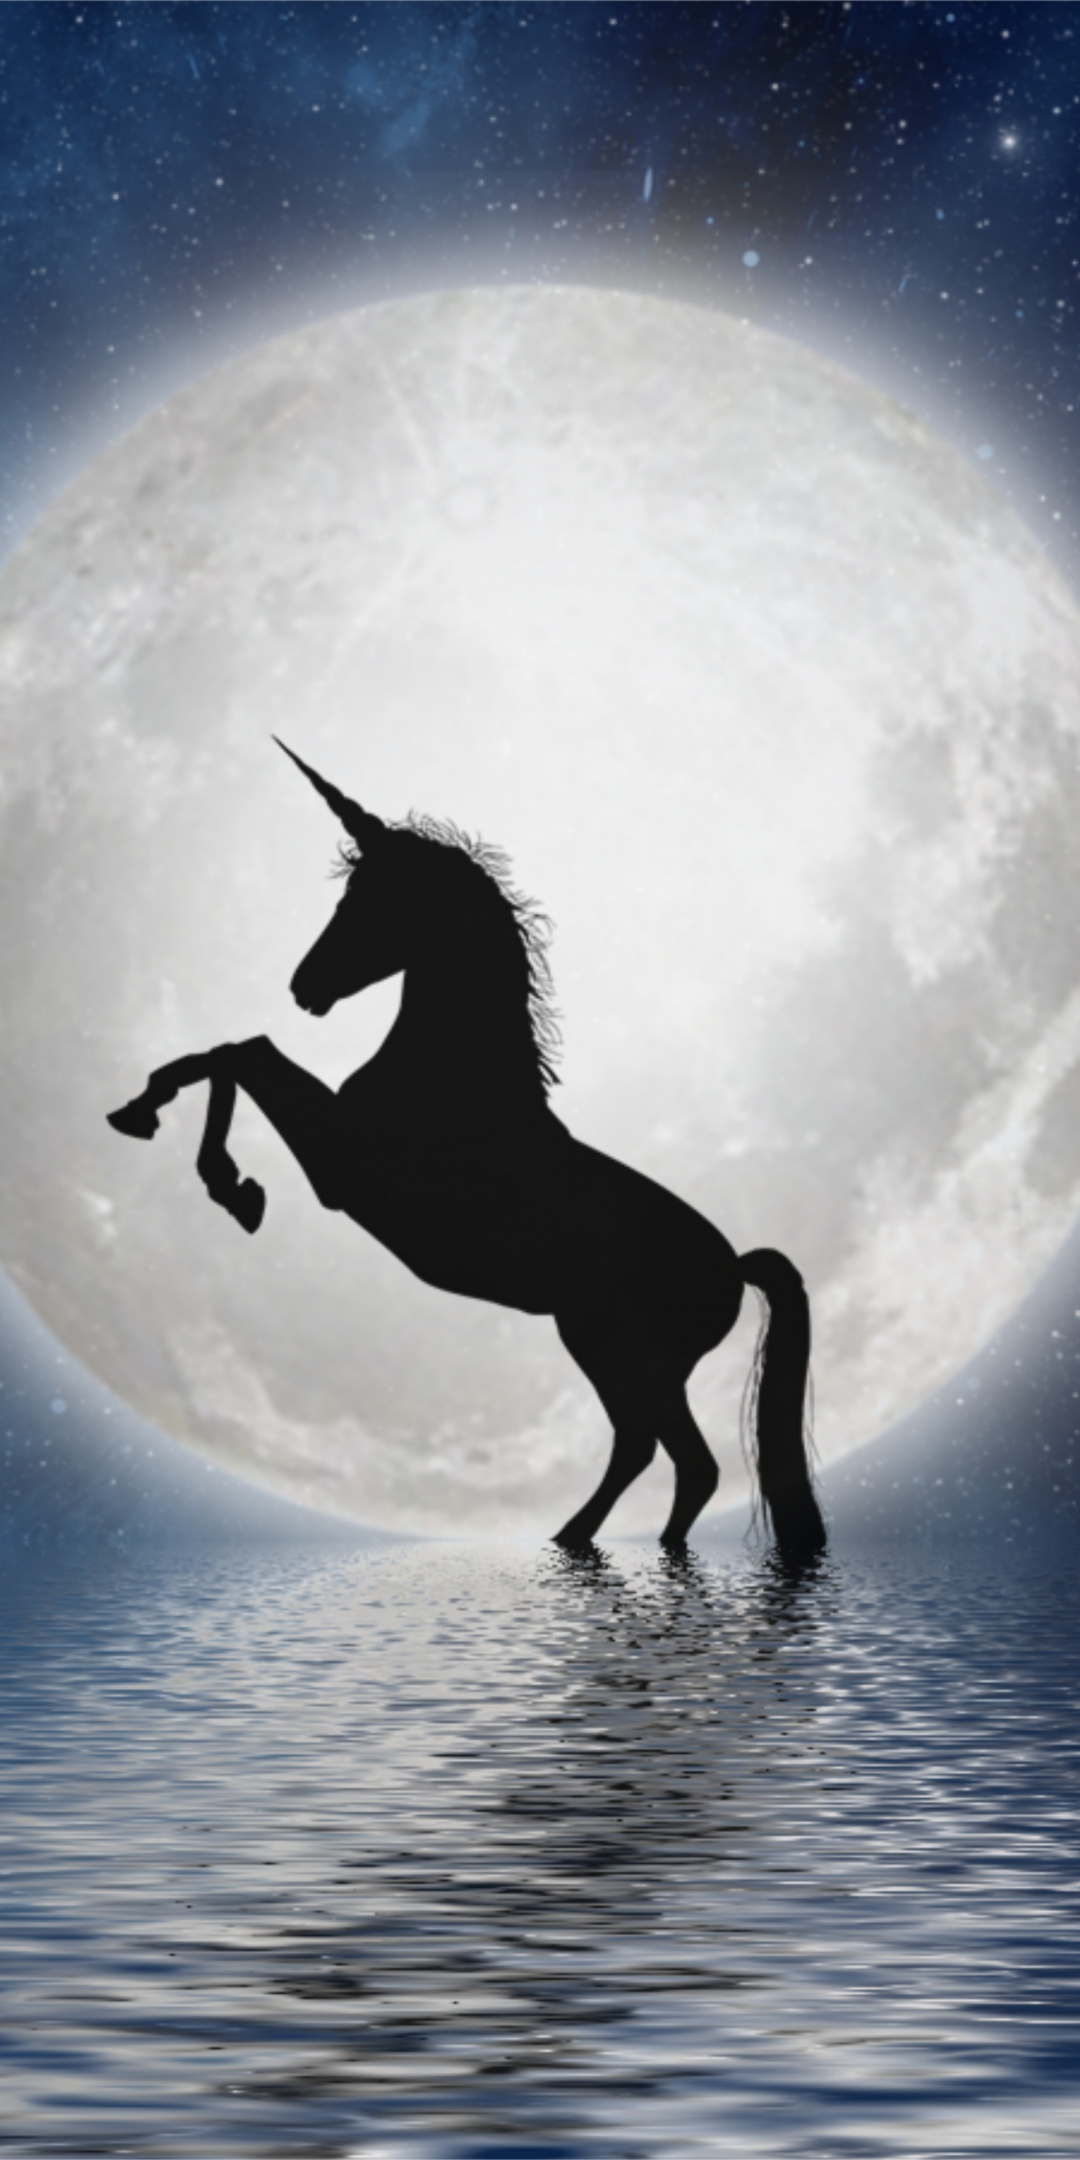 Download 1080x2160 Wallpaper Unicorn Moon Silhouette Art Honor 7x Honor 9 Lite Honor View 10 Hd Image Background 18186